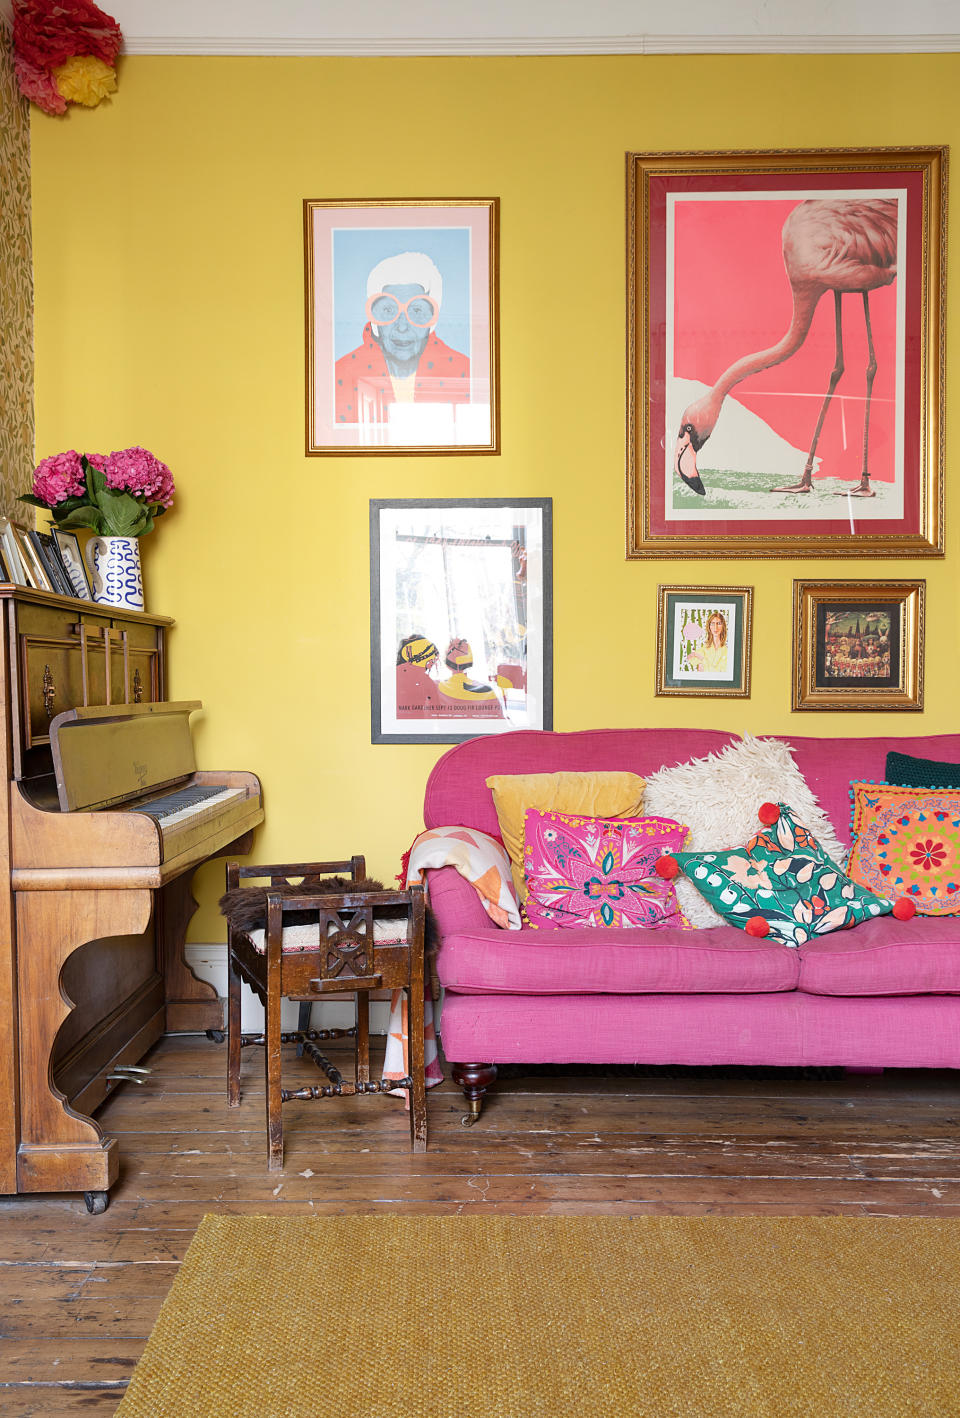 <p> You just can&apos;t look at this room without feeling happier, right?&#xA0; </p> <p> Pink and yellow are a bold combo yes, but styled right together they can look really chic, in a fun and creative way. This living room actually feels really classic and elegant, despite the bold colors. </p> <p> The wooden accents and quirky gallery wall idea complete the look perfectly &#x2013; they are eccentric but also liveable, and we love it. </p>